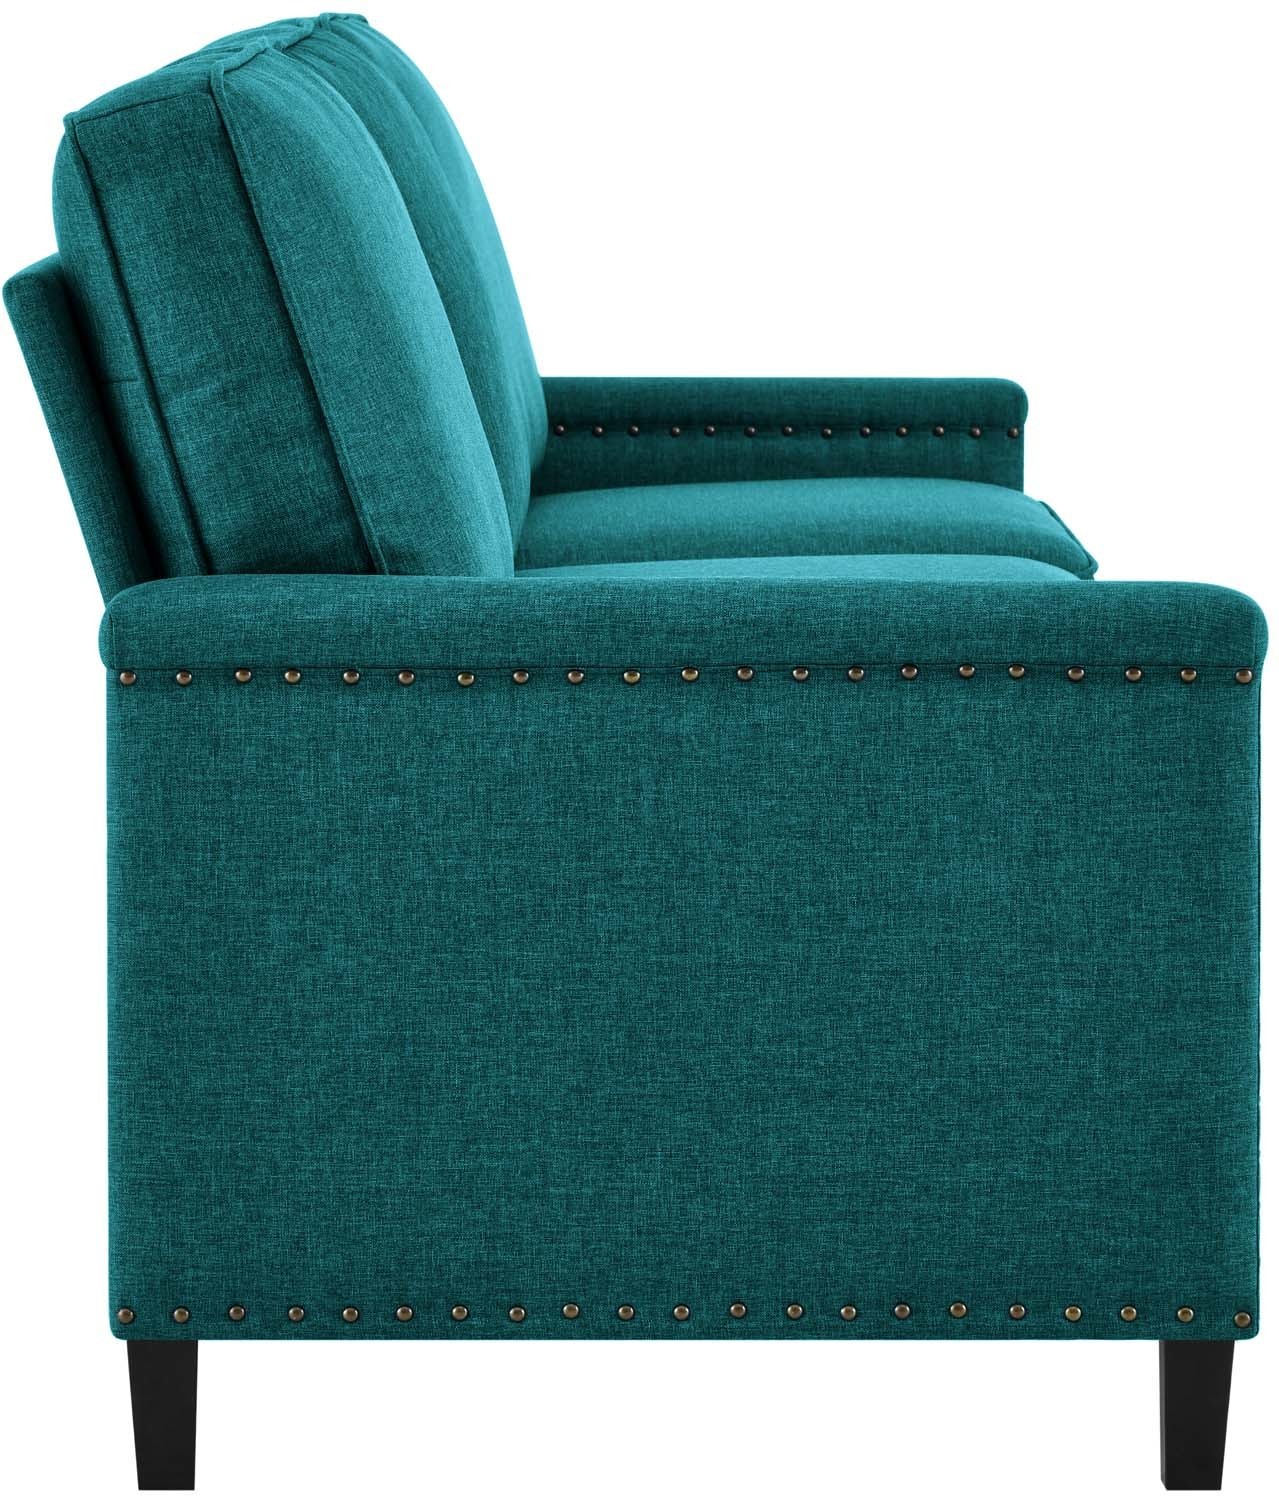 sofas and sectionals Modway Furniture Teal